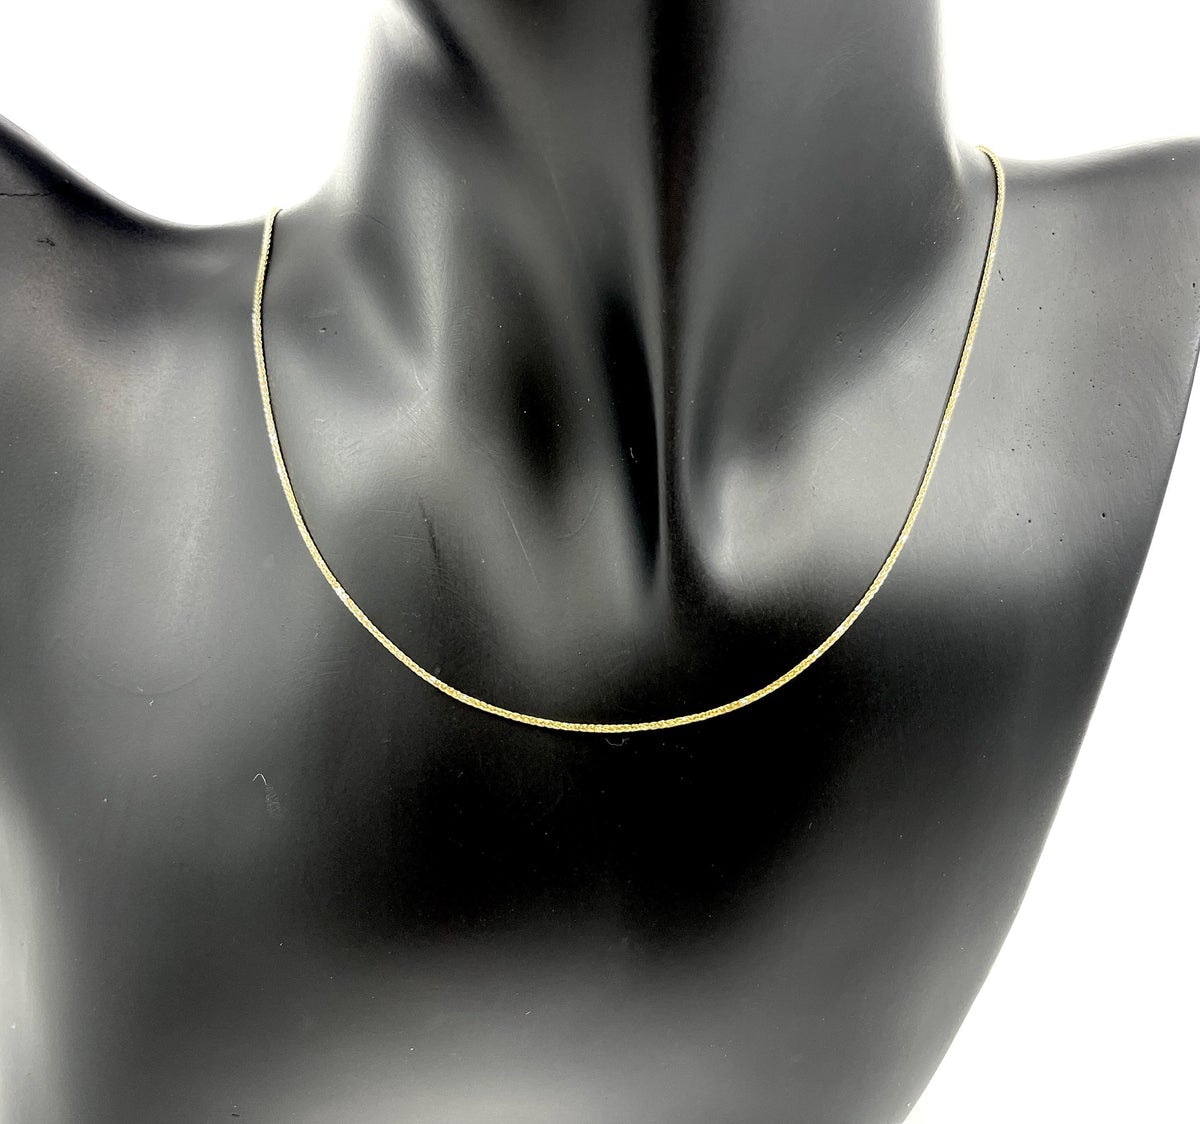 Tracking - 10K Yellow Gold Wheat Chain - 0.80 mm